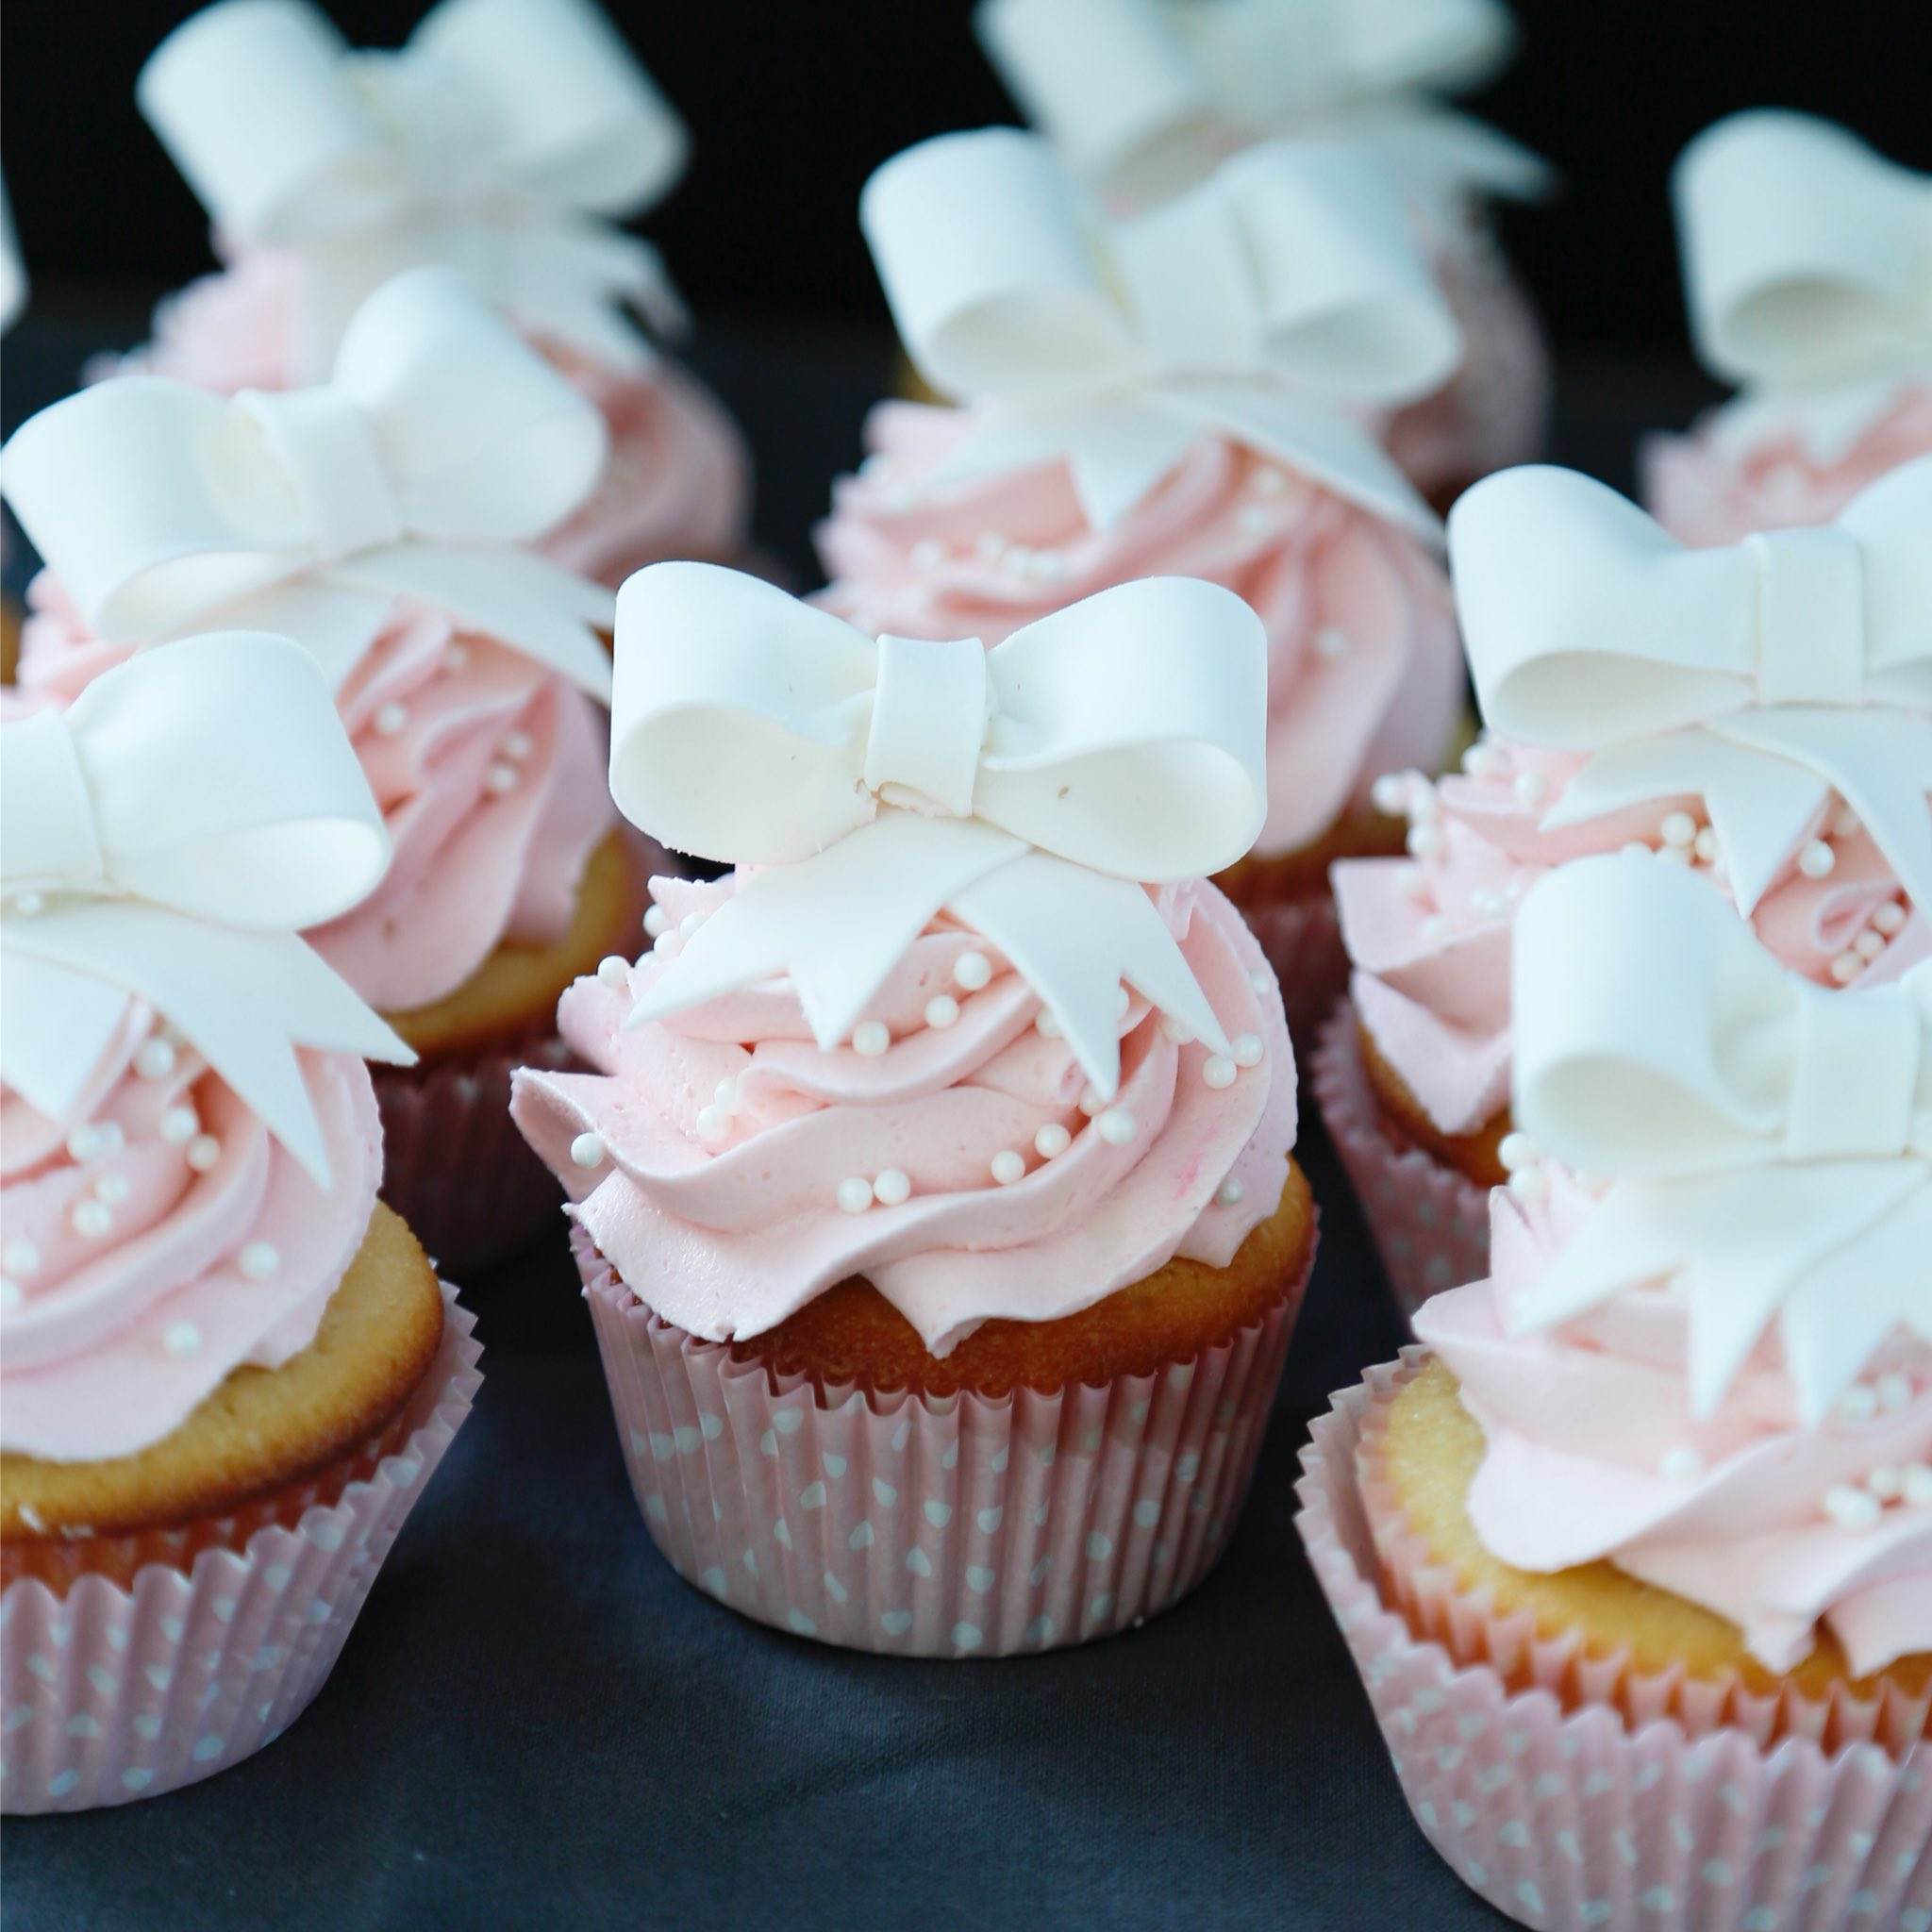 Top 15 Most Shared Cupcakes Baby Shower